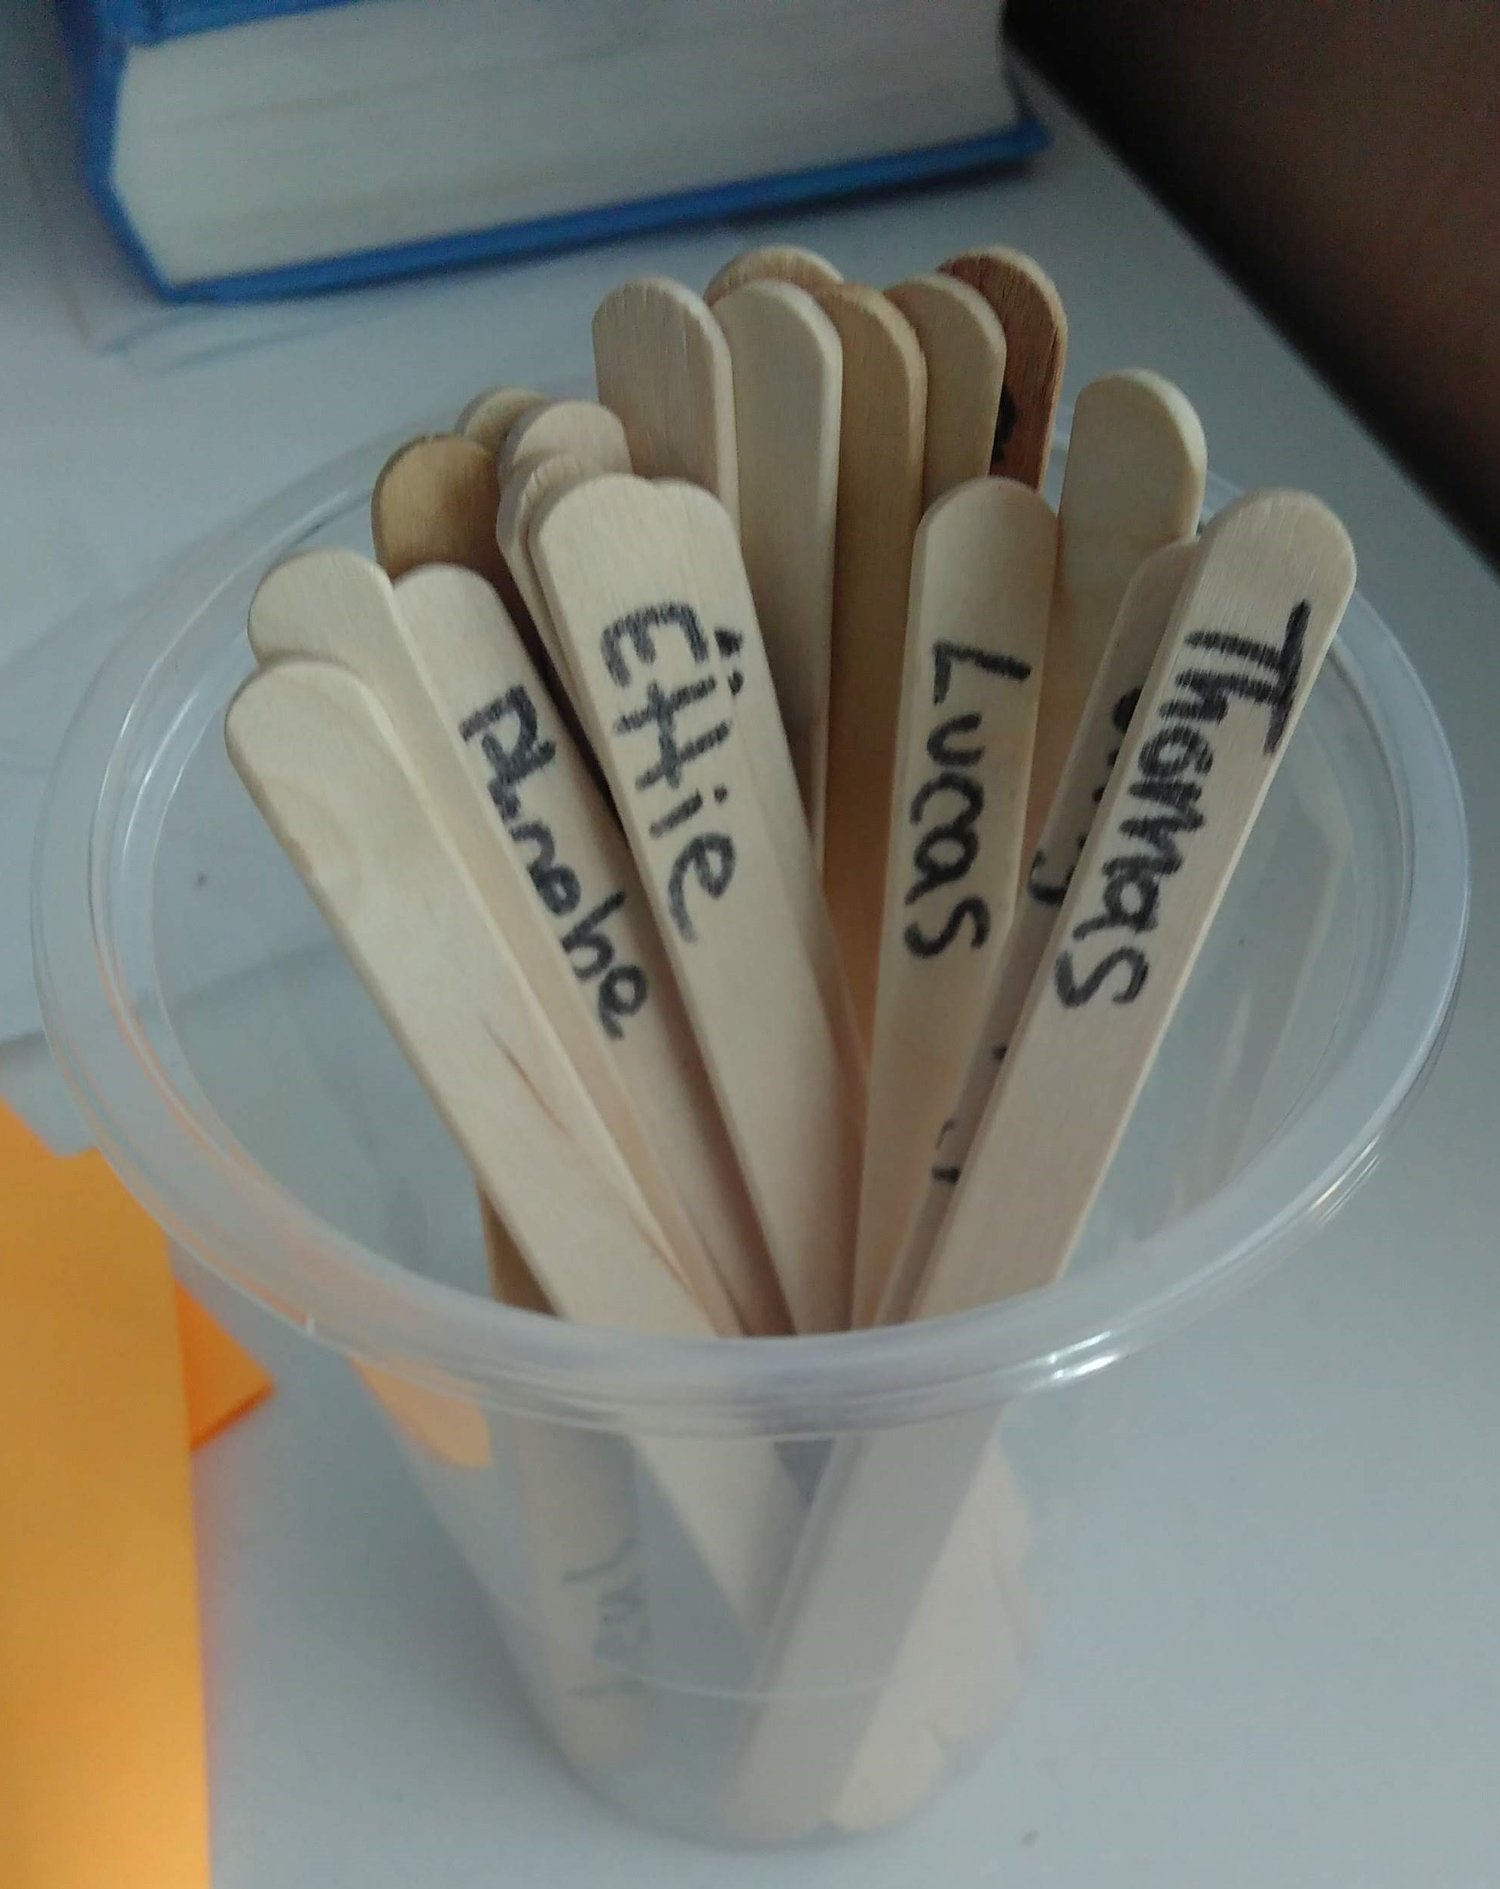 Tips for using lolly sticks - Topsy Page